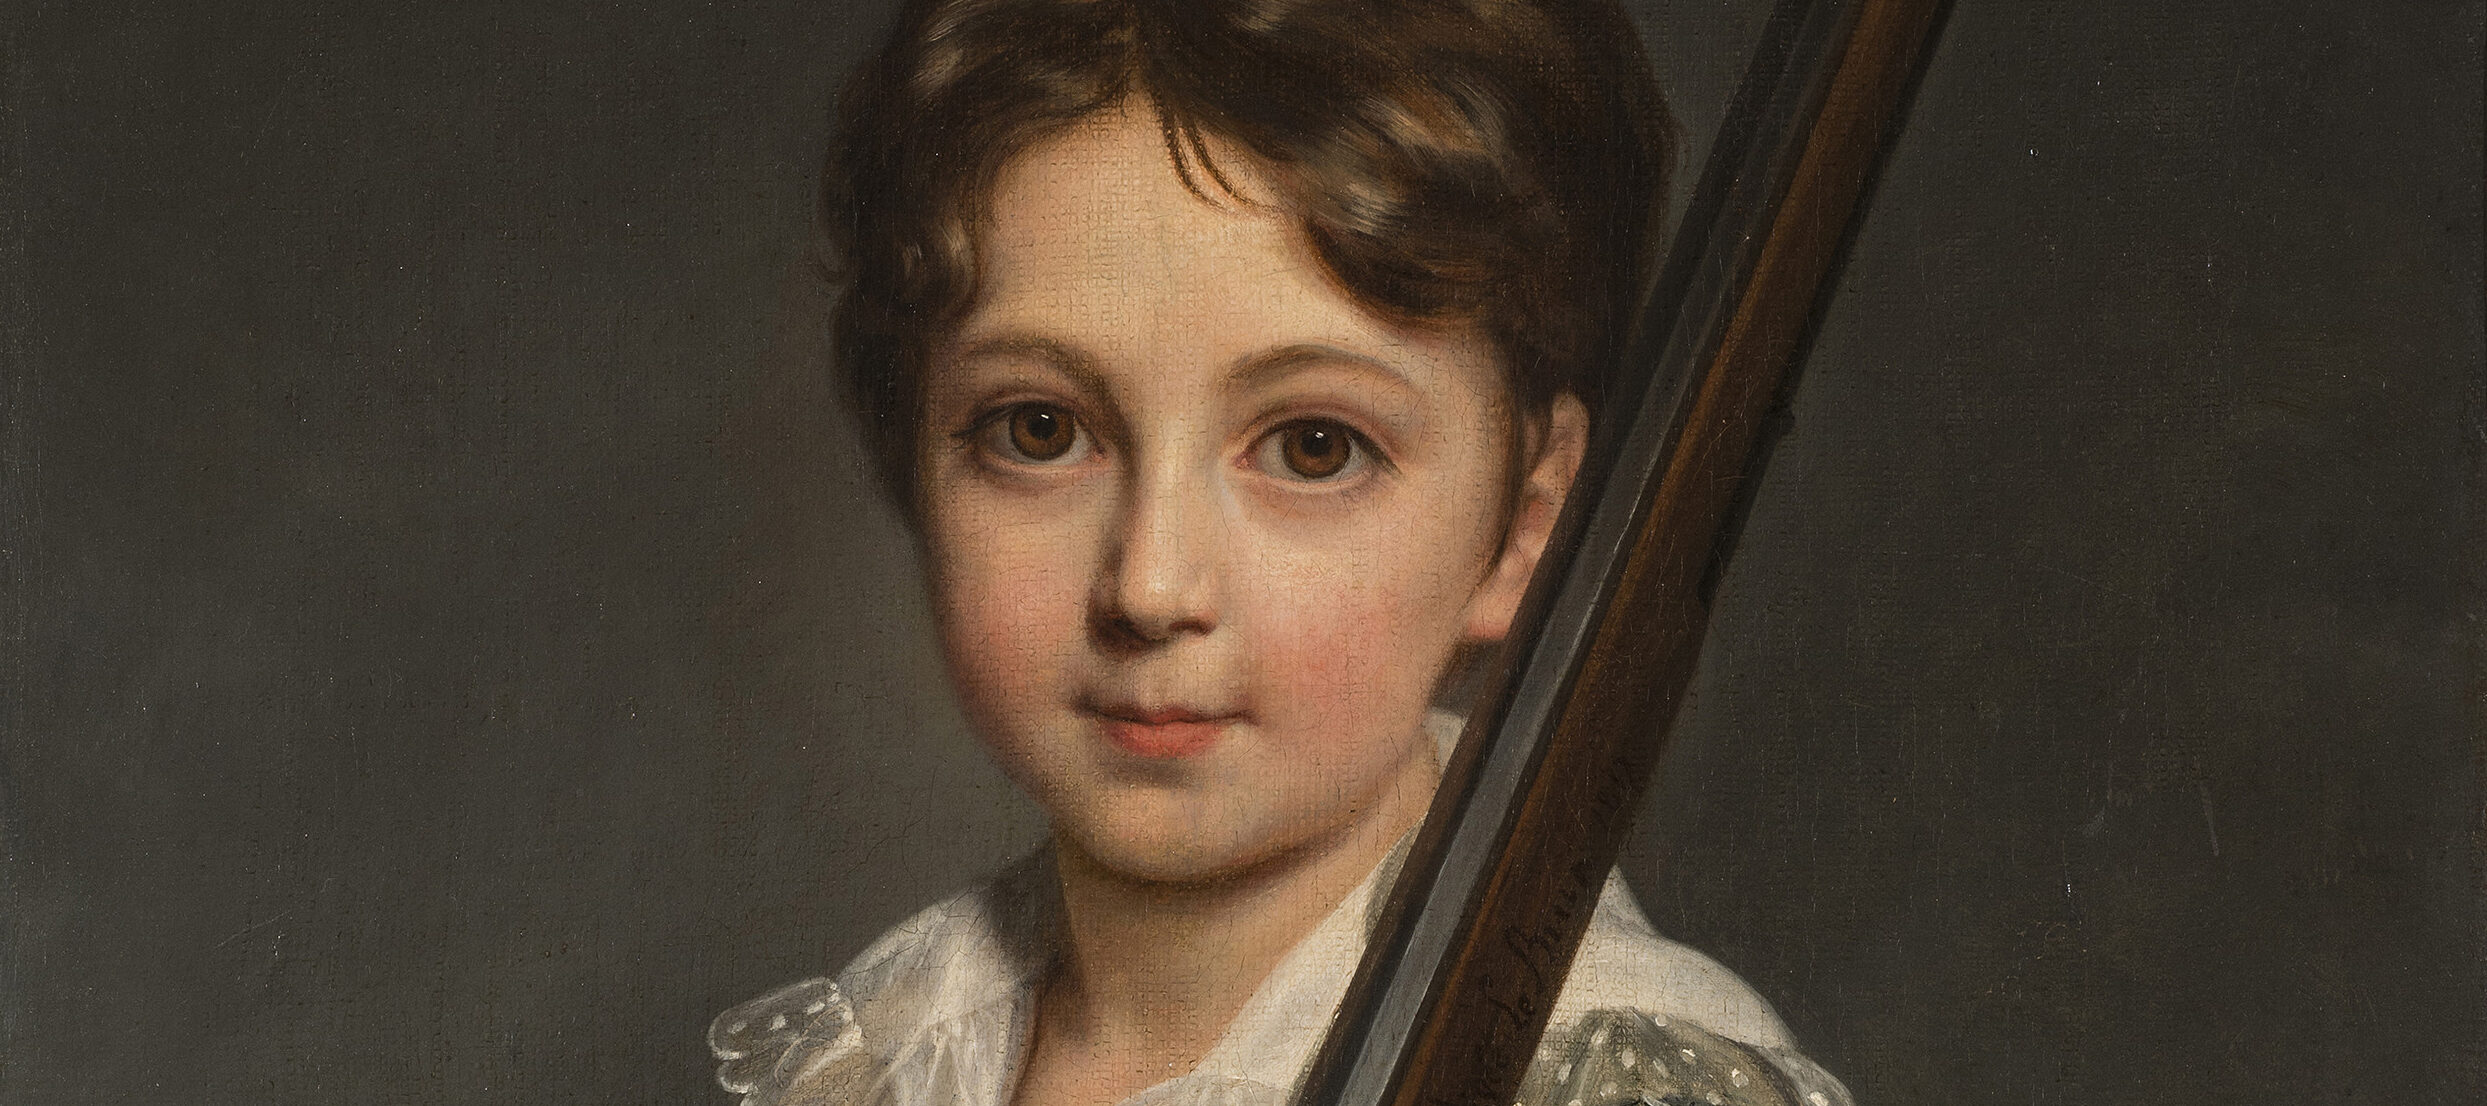 A young boy with light skin and brown hair faces the viewer while cradling the stock of a rifle in his arms and resting the barrel on his left shoulder. He wears a delicate lace collar and is shown against a gray background with visible brushstrokes.